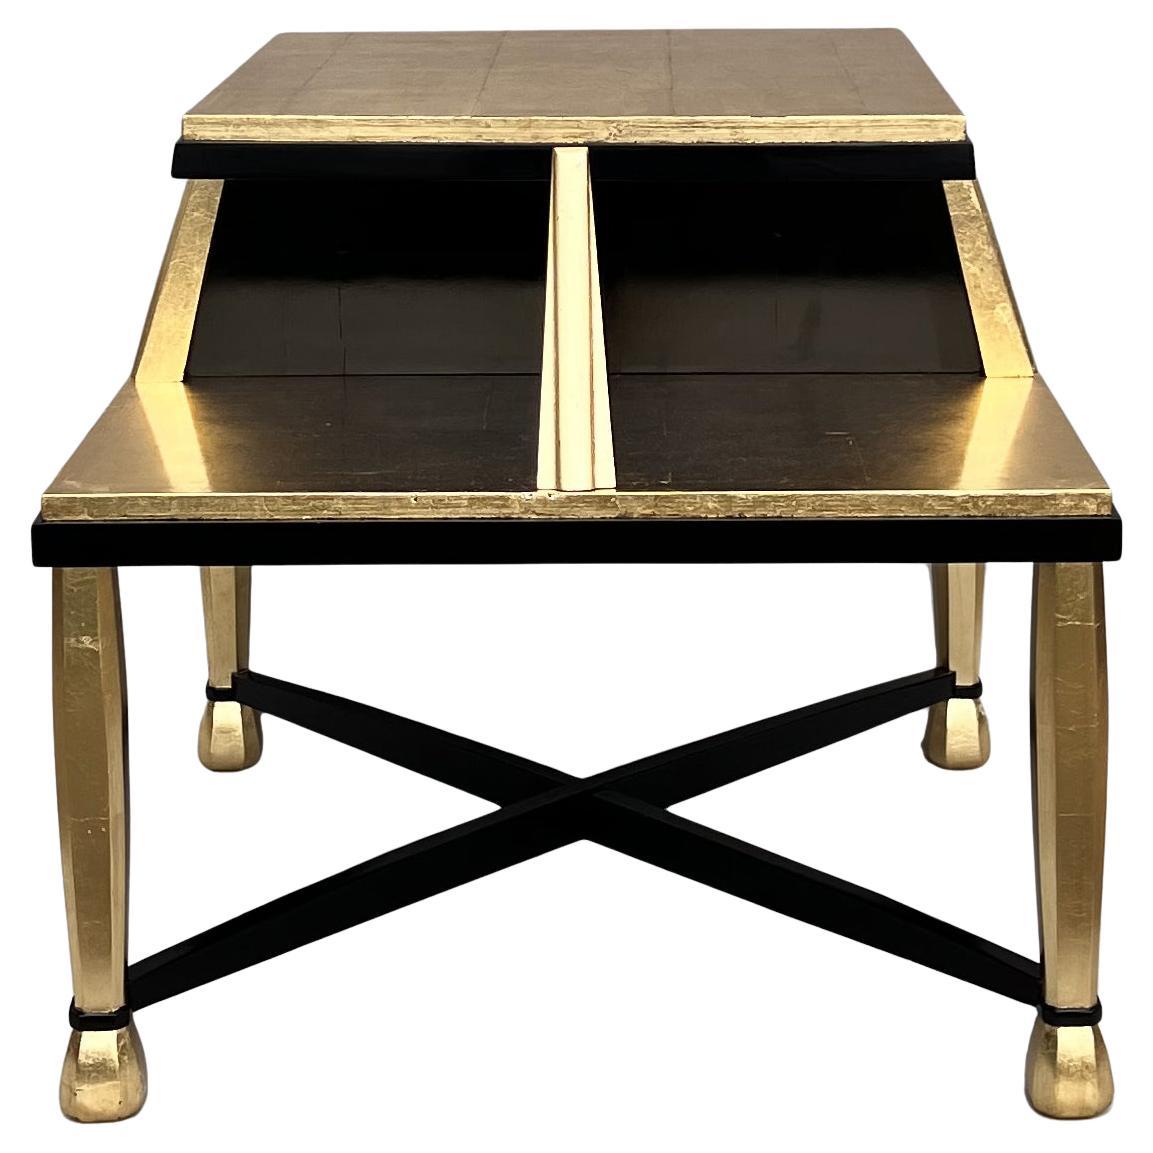 Art Deco Coffee Table in Giltwood and Black Lacquer, 1930s For Sale